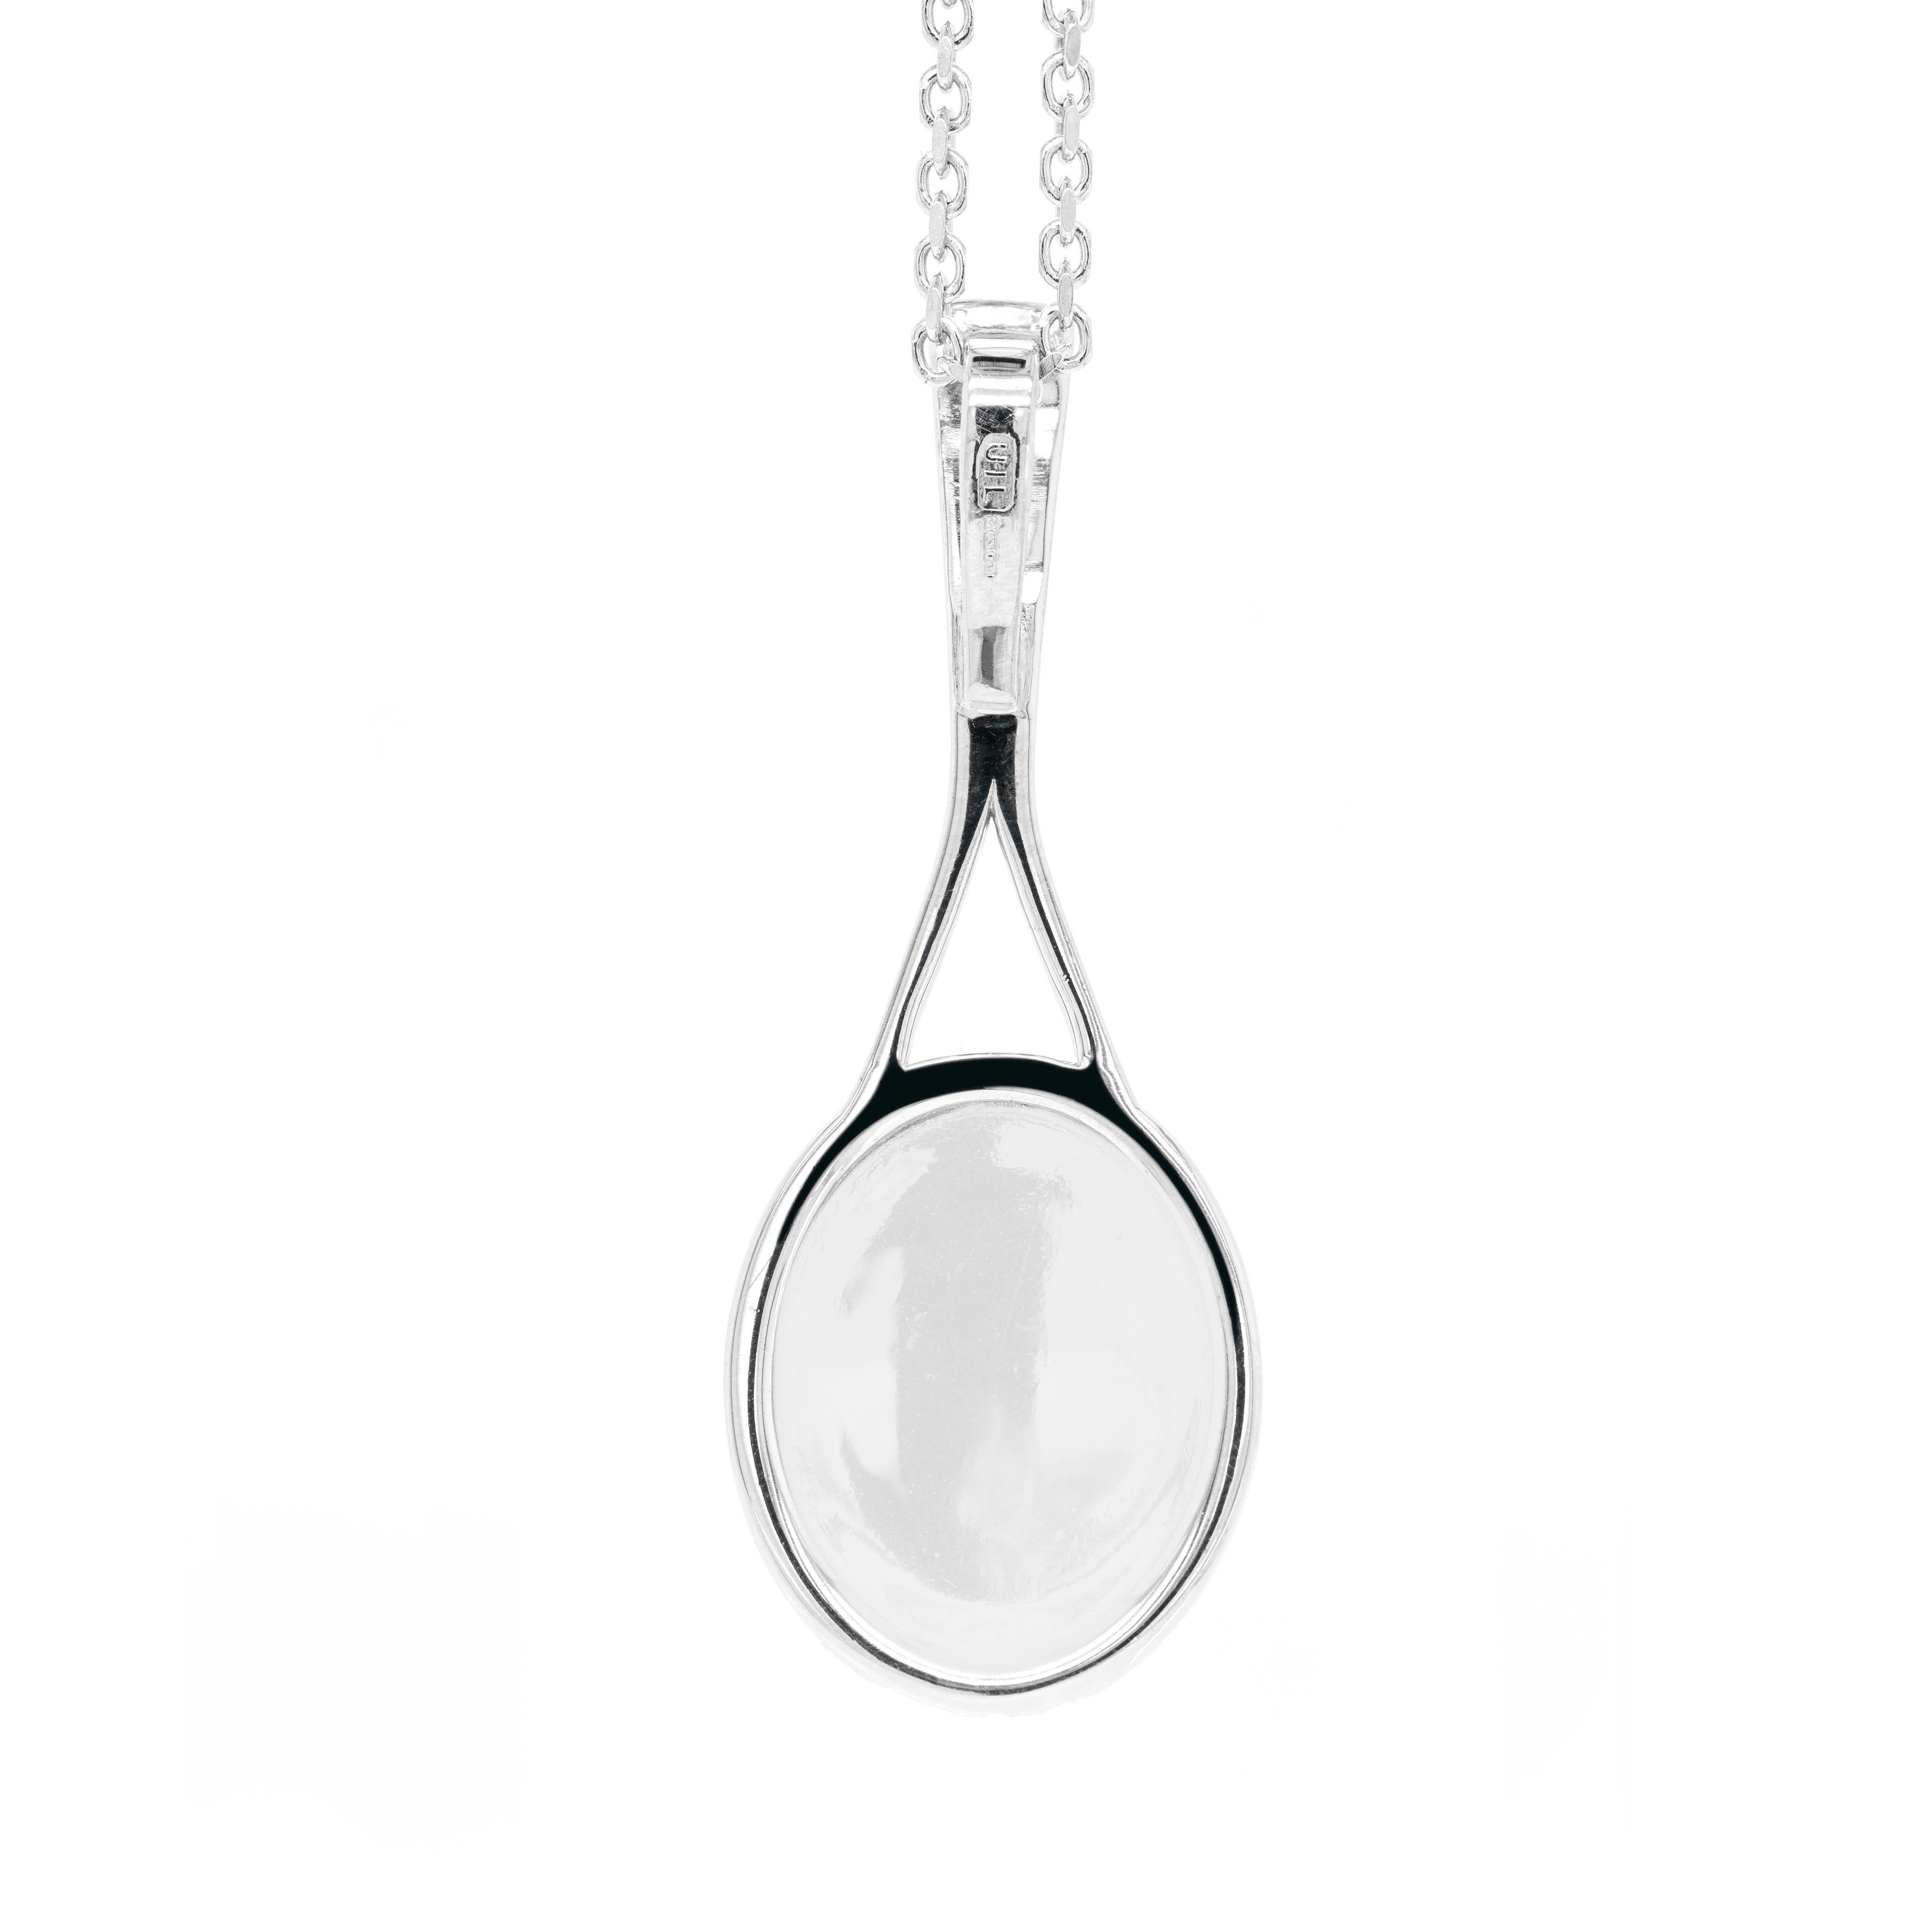 Modern Diamond 18 Carat White Gold Tennis Racket Pendant and Chain For Sale